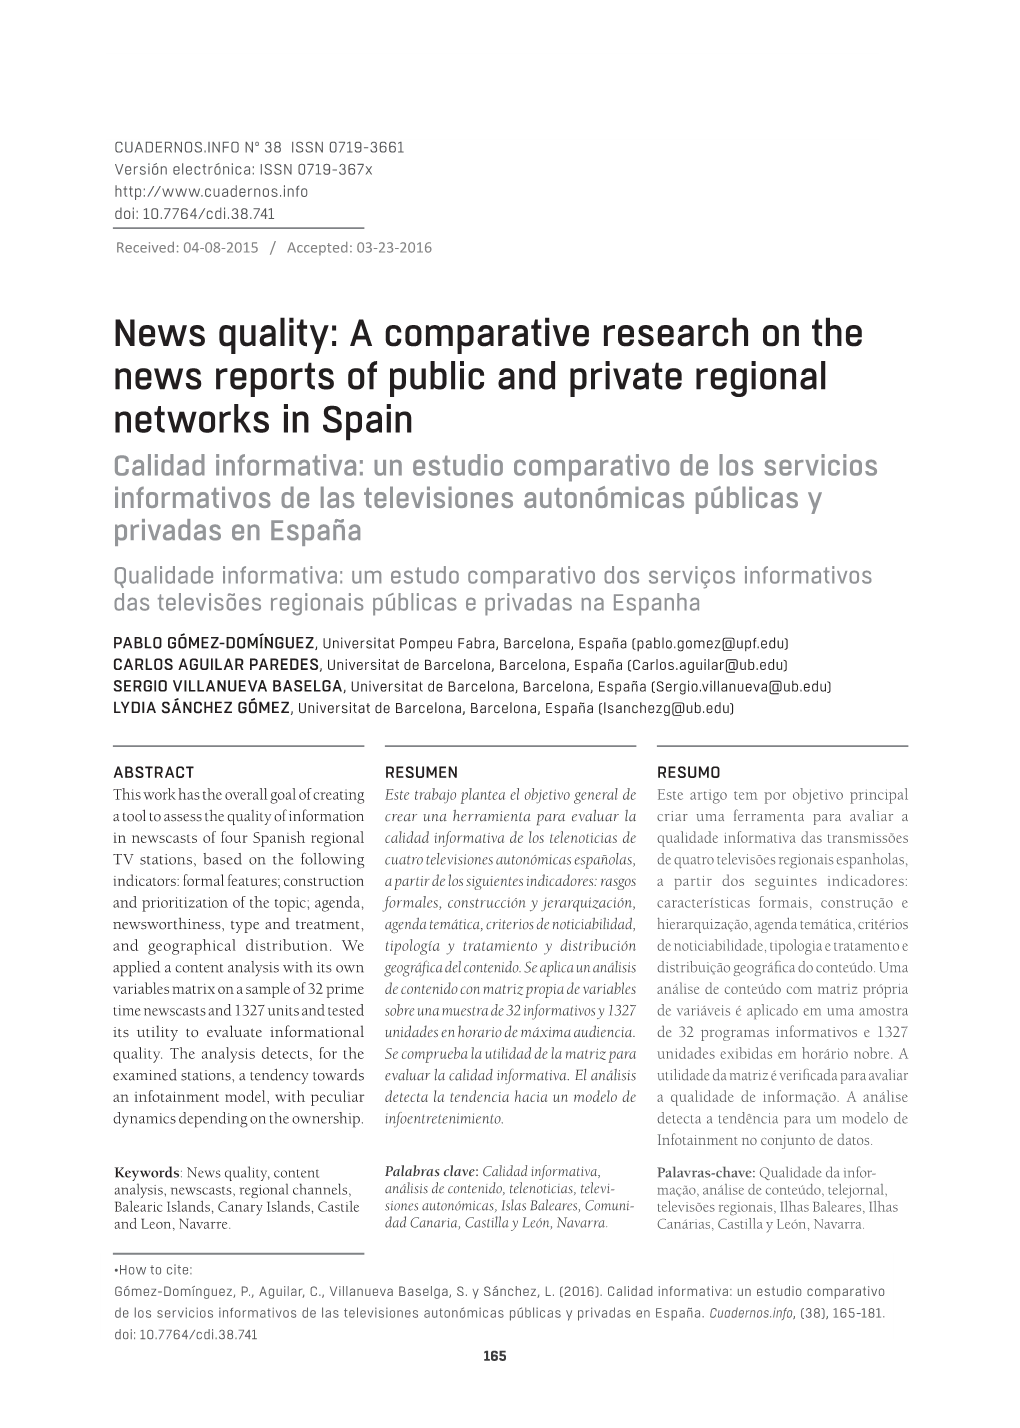 News Quality: a Comparative Research